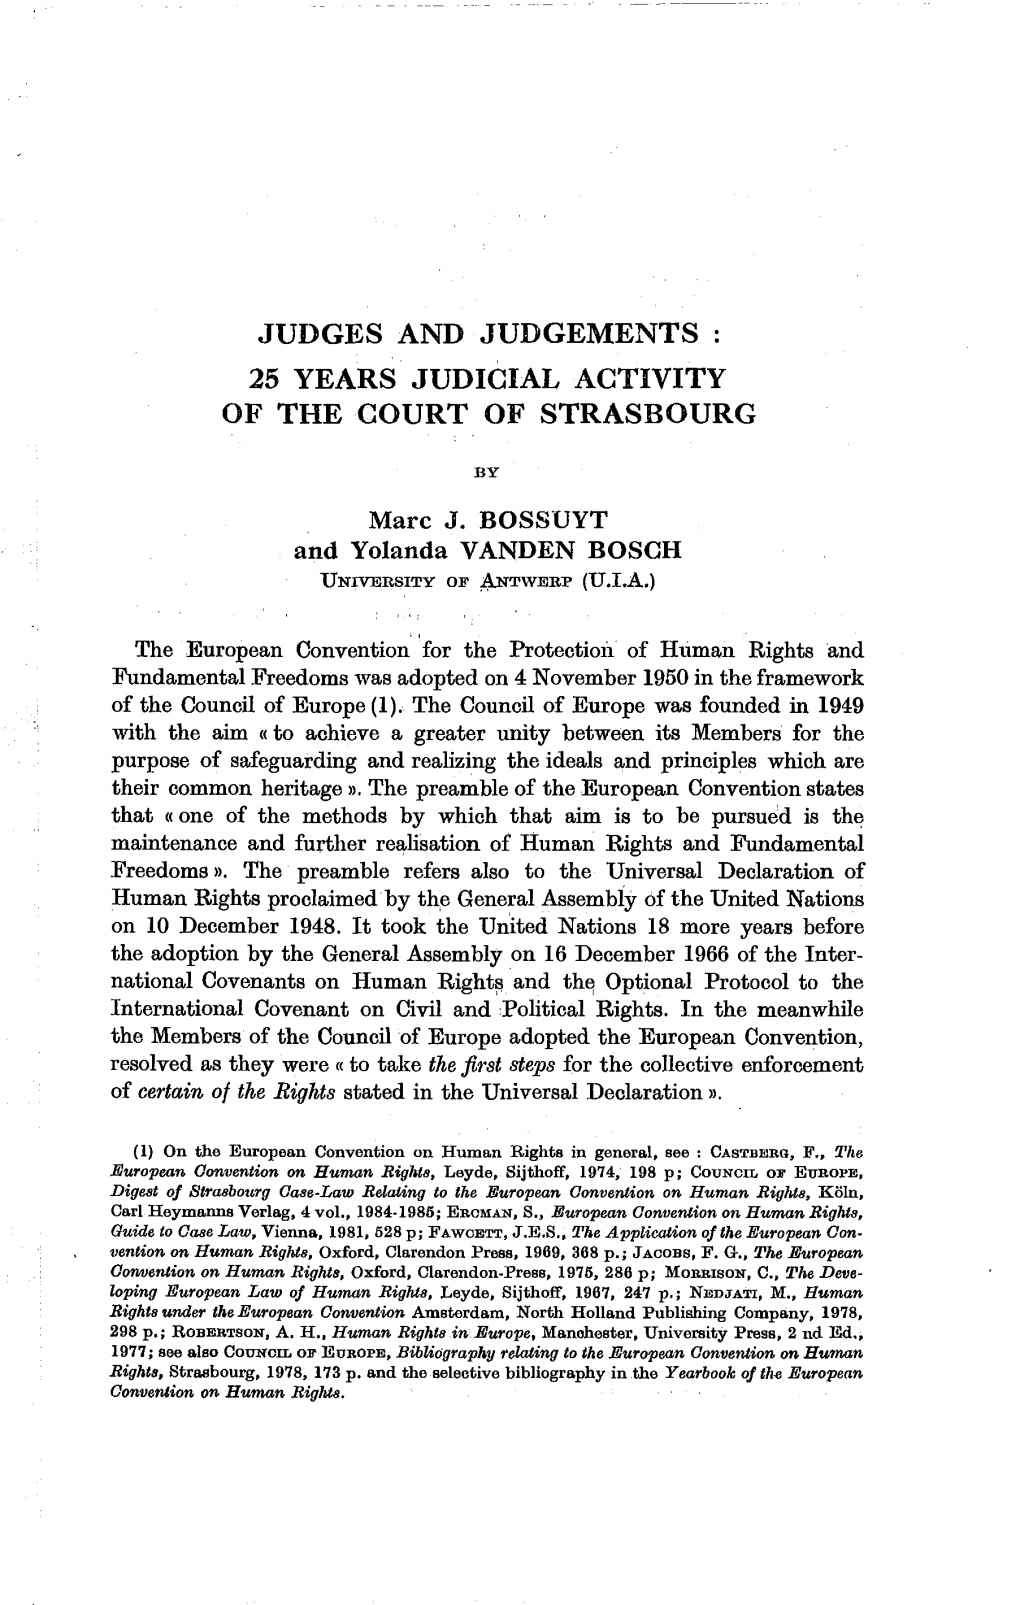 Judges and Judgements 25 Years Judicïal Activity of the Court of Strasbourg